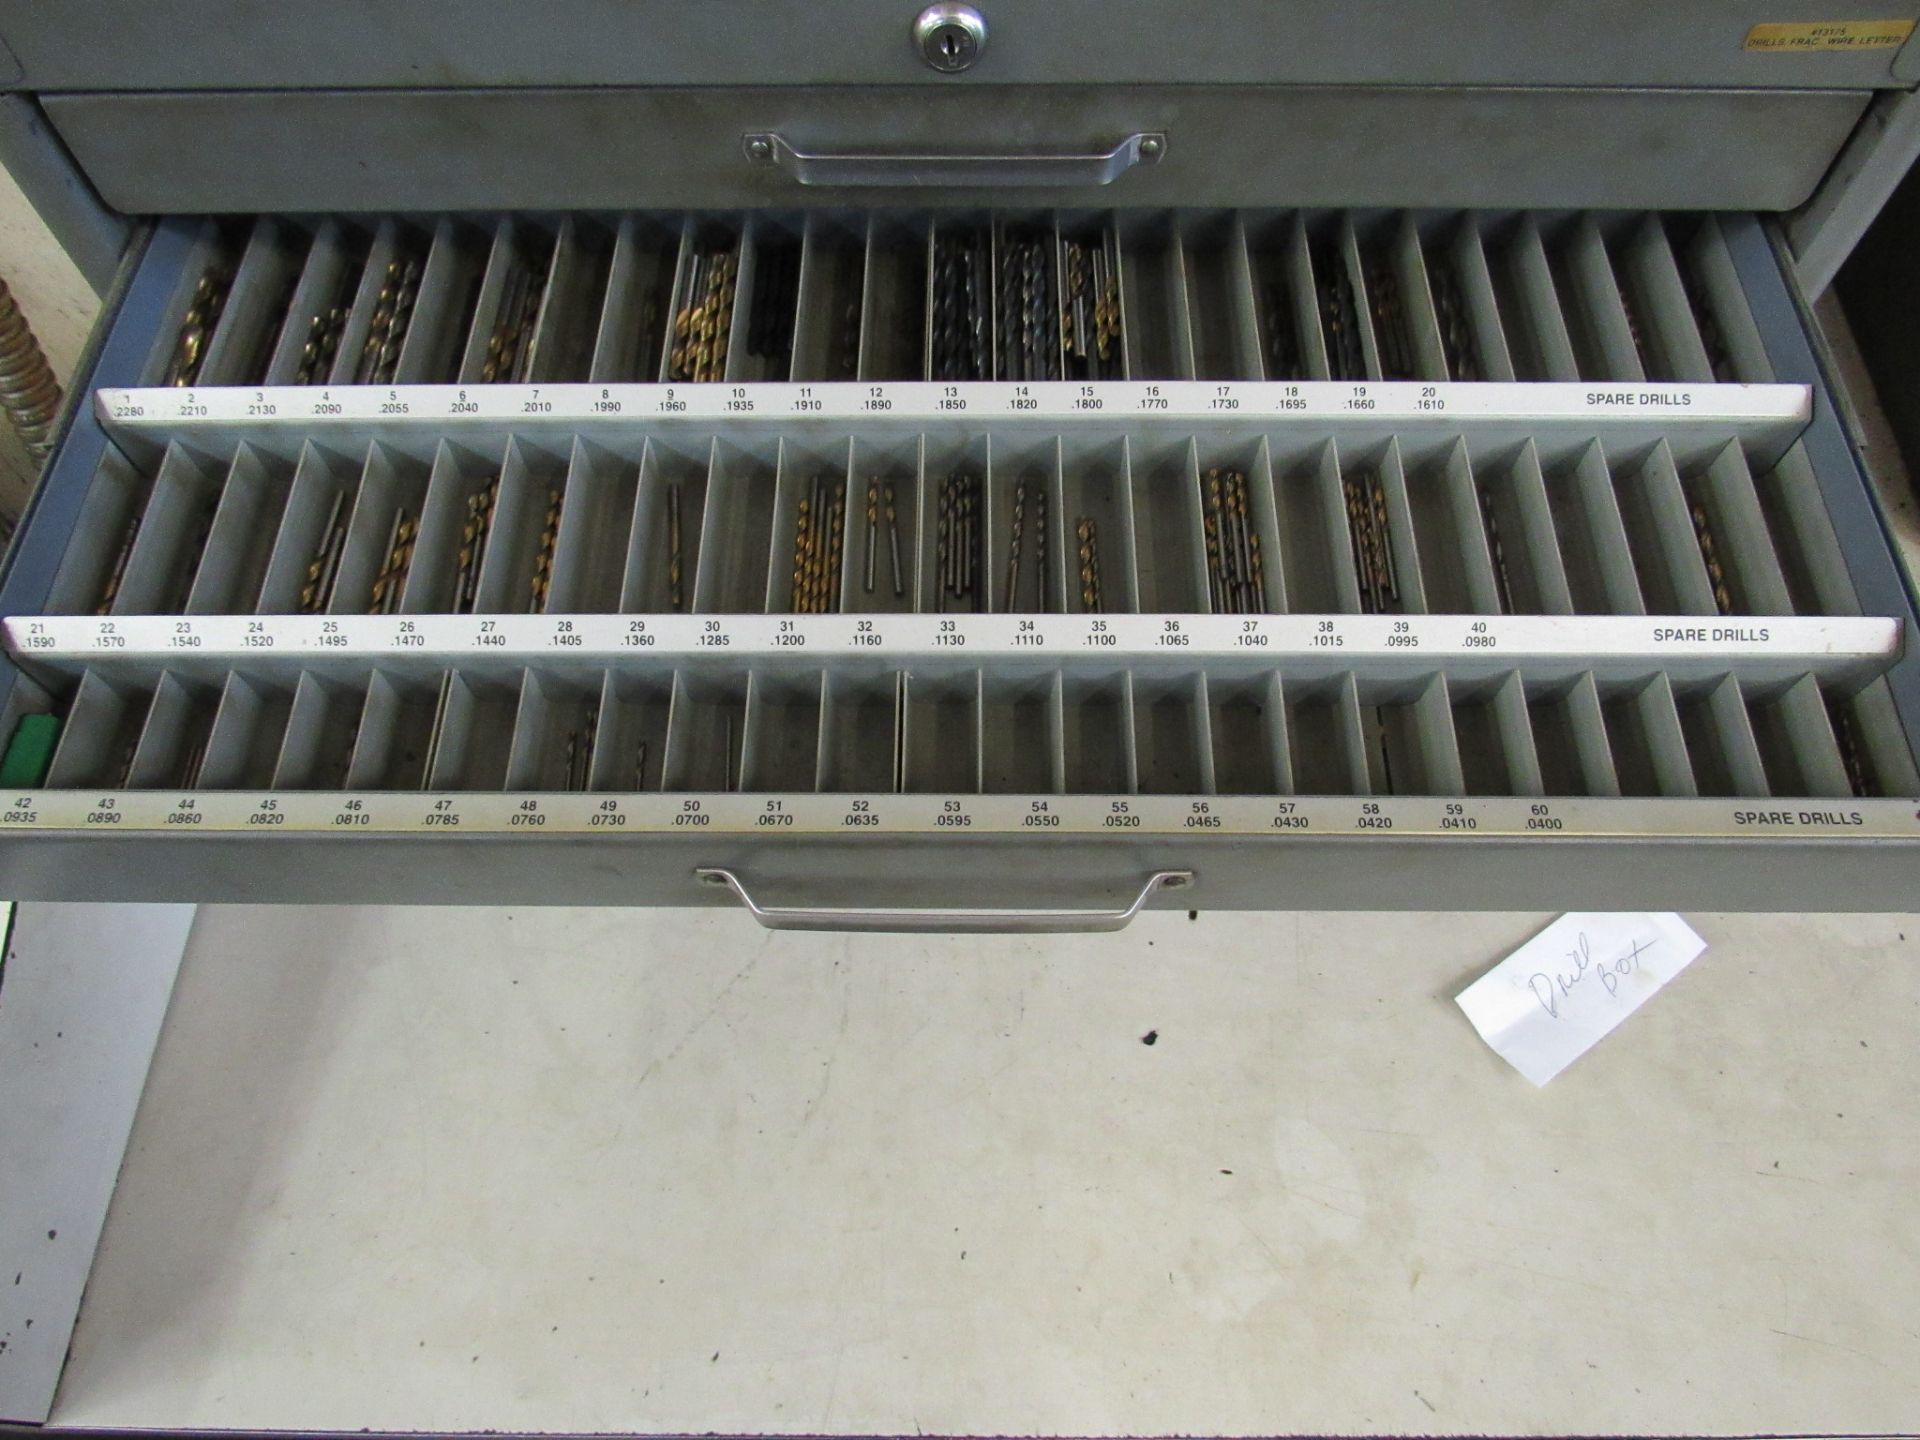 HUOT CABINET WITH DRILLS - Image 4 of 5